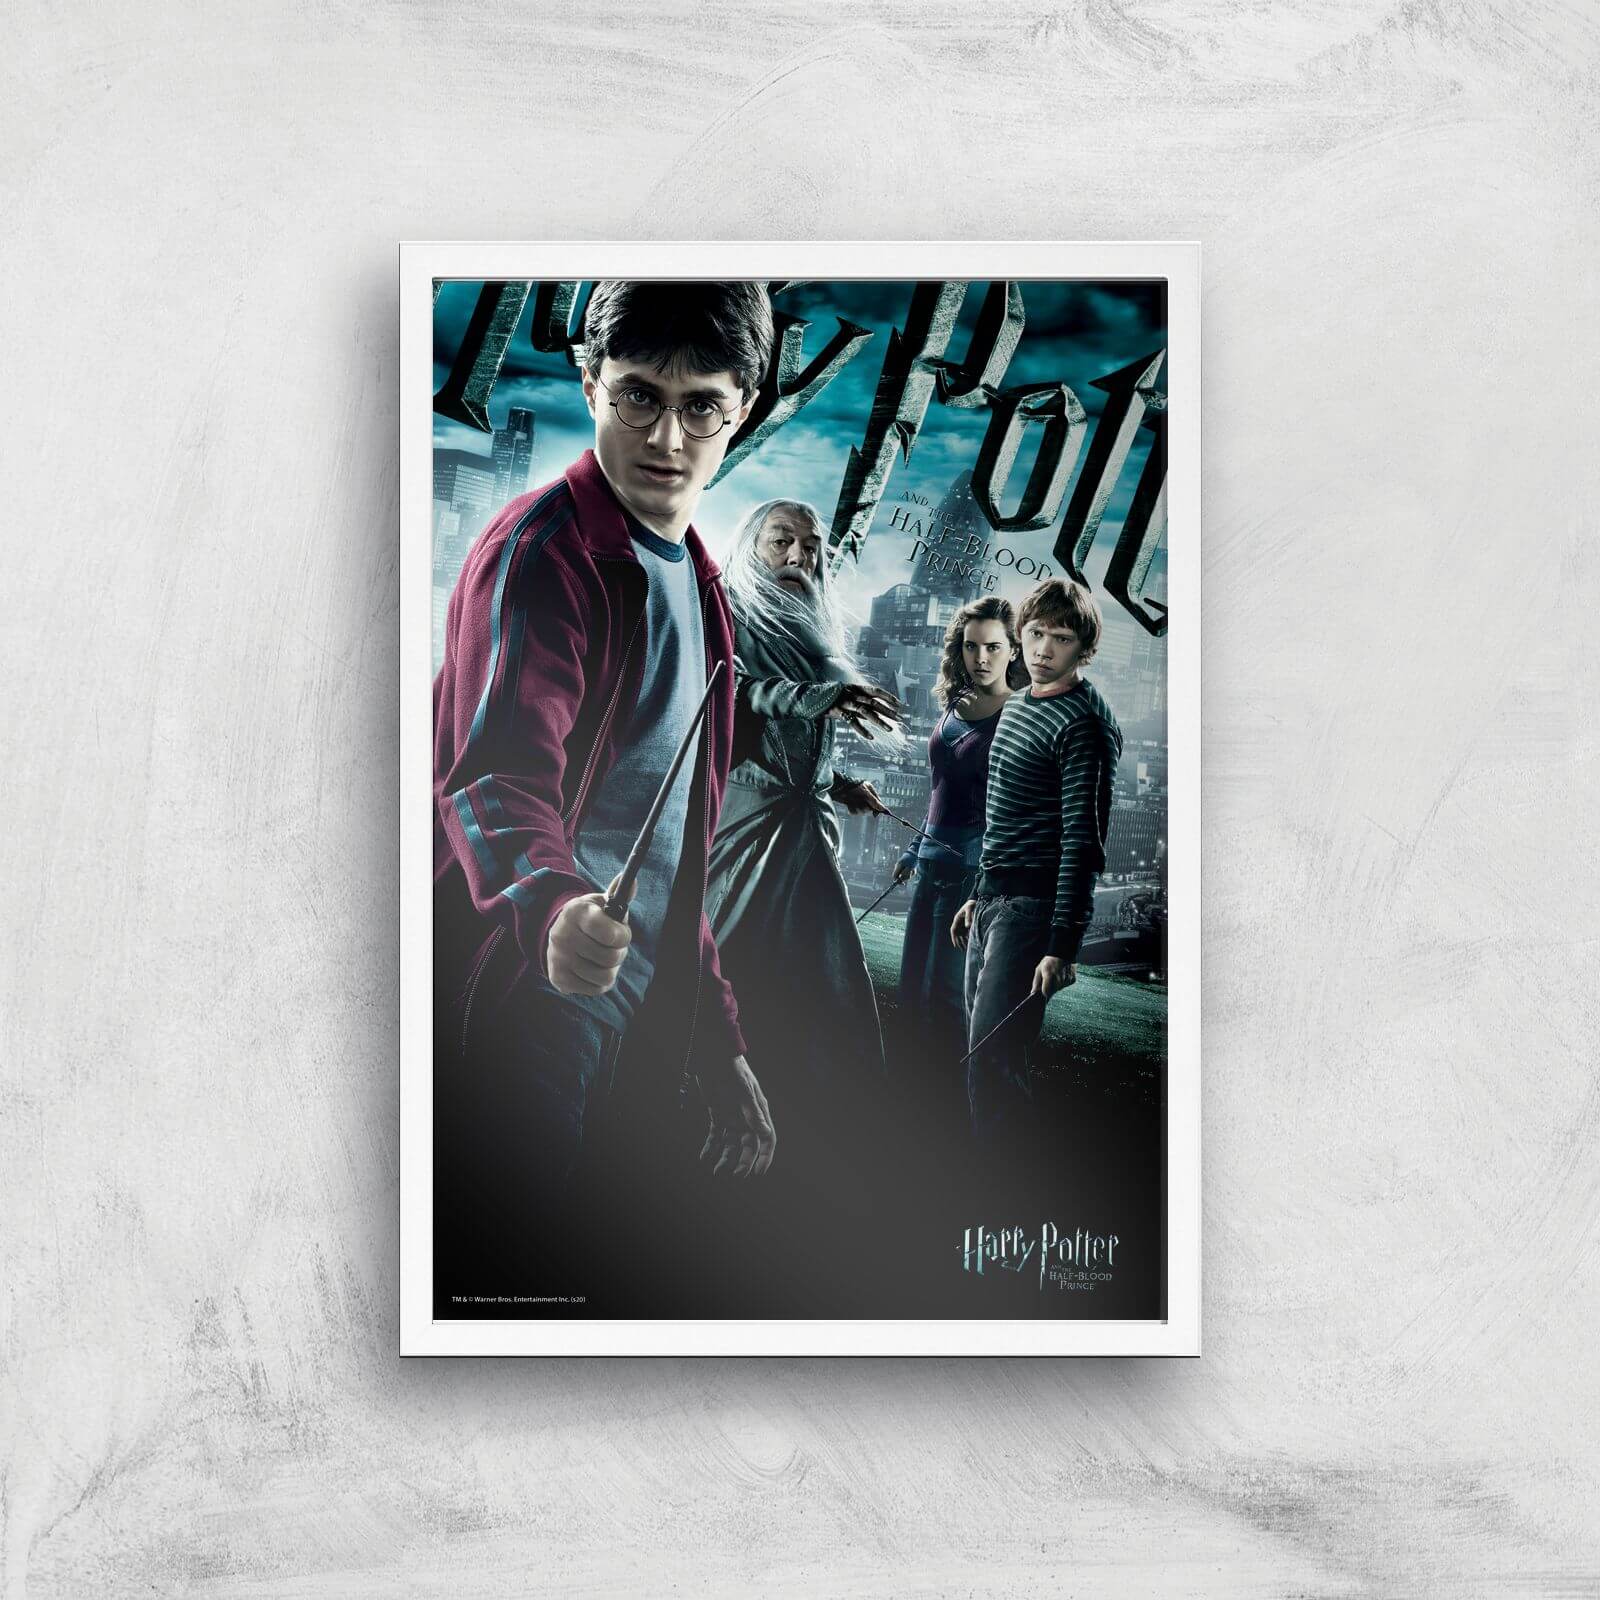 Harry Potter and the Half-Blood Prince Giclee Art Print - A2 - White Frame